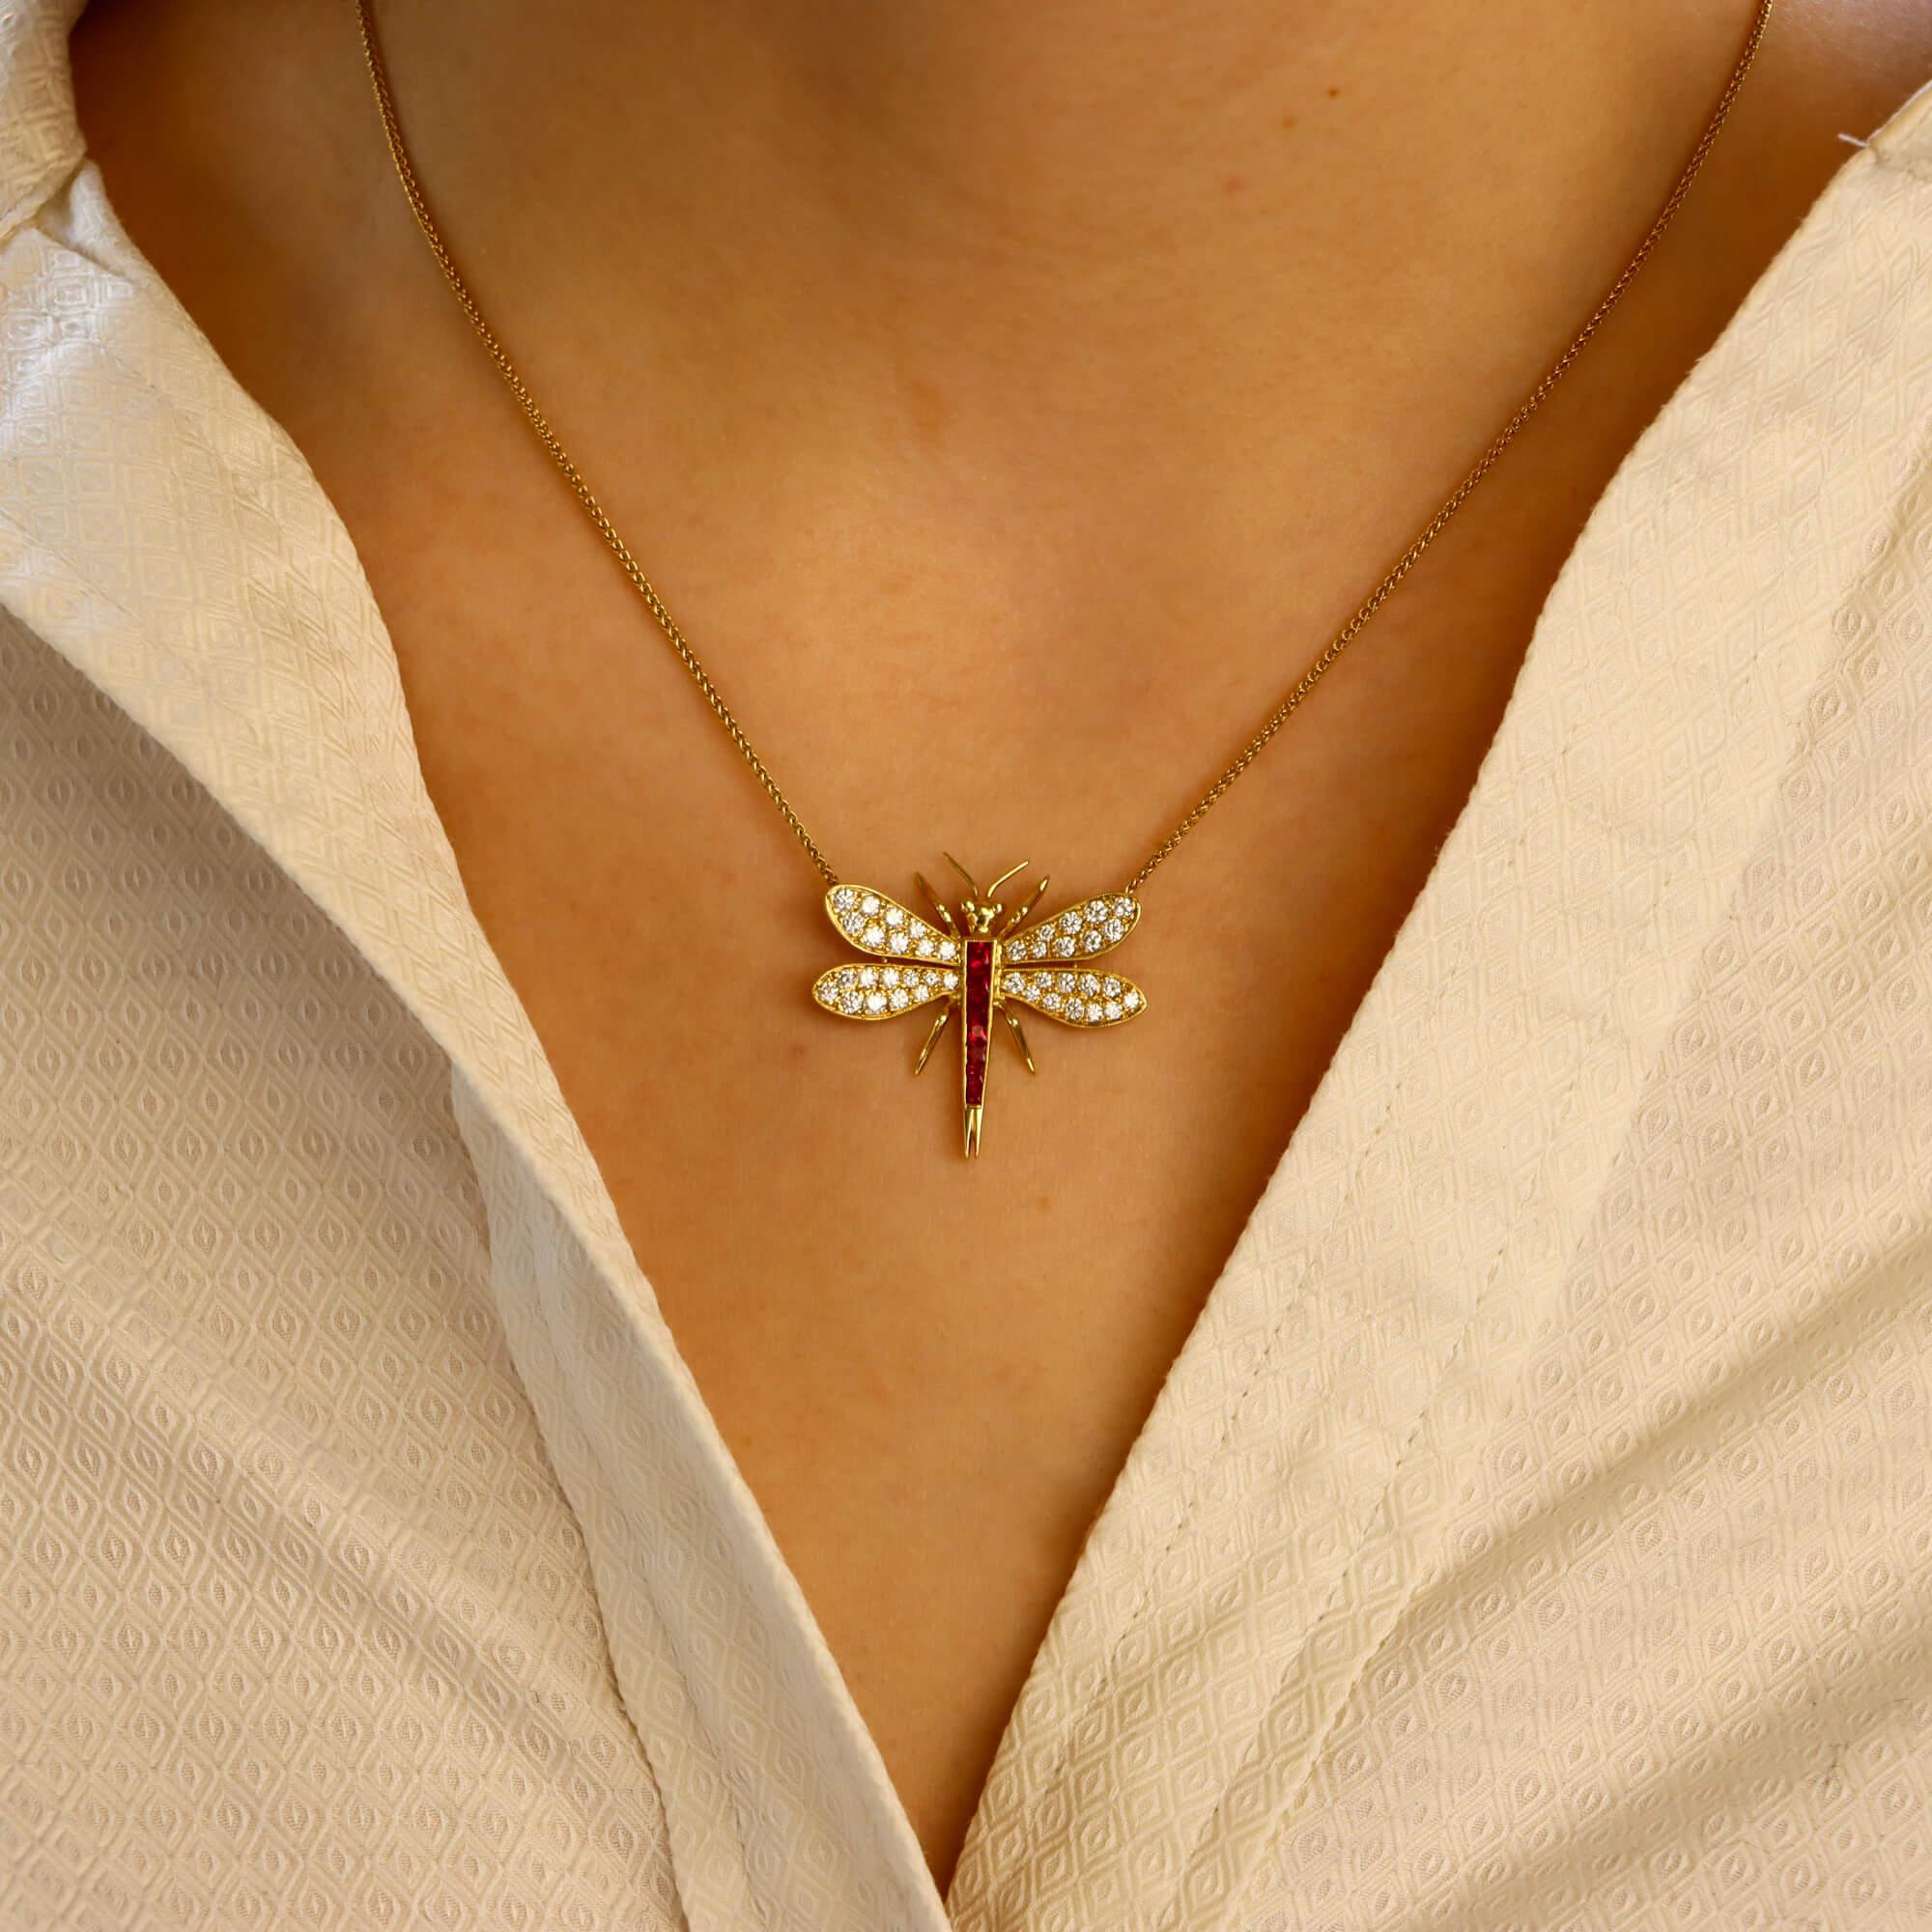 Modern Diamond and Ruby Dragonfly Pendant Necklace Set in 18 Karat Yellow Gold